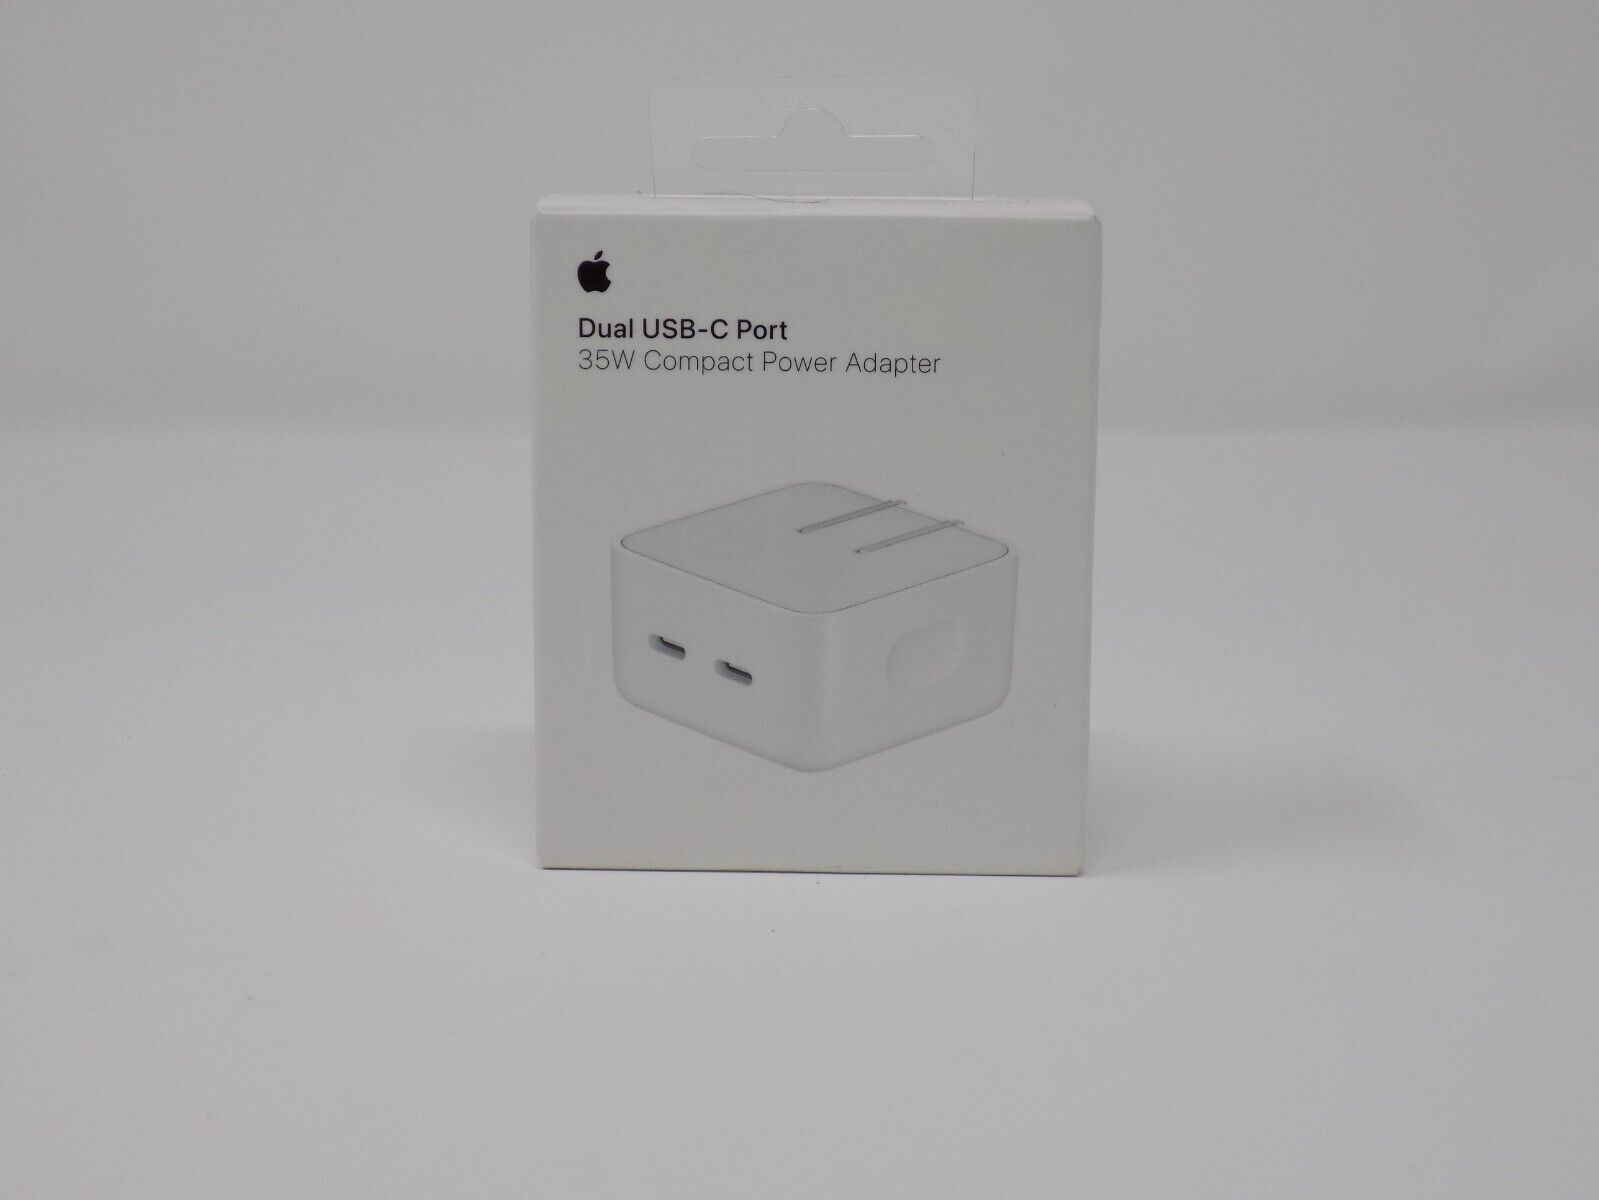 Genuine Apple - 35W Dual USB-C Port Compact Power Adapter - MNWM3AM/A - Open